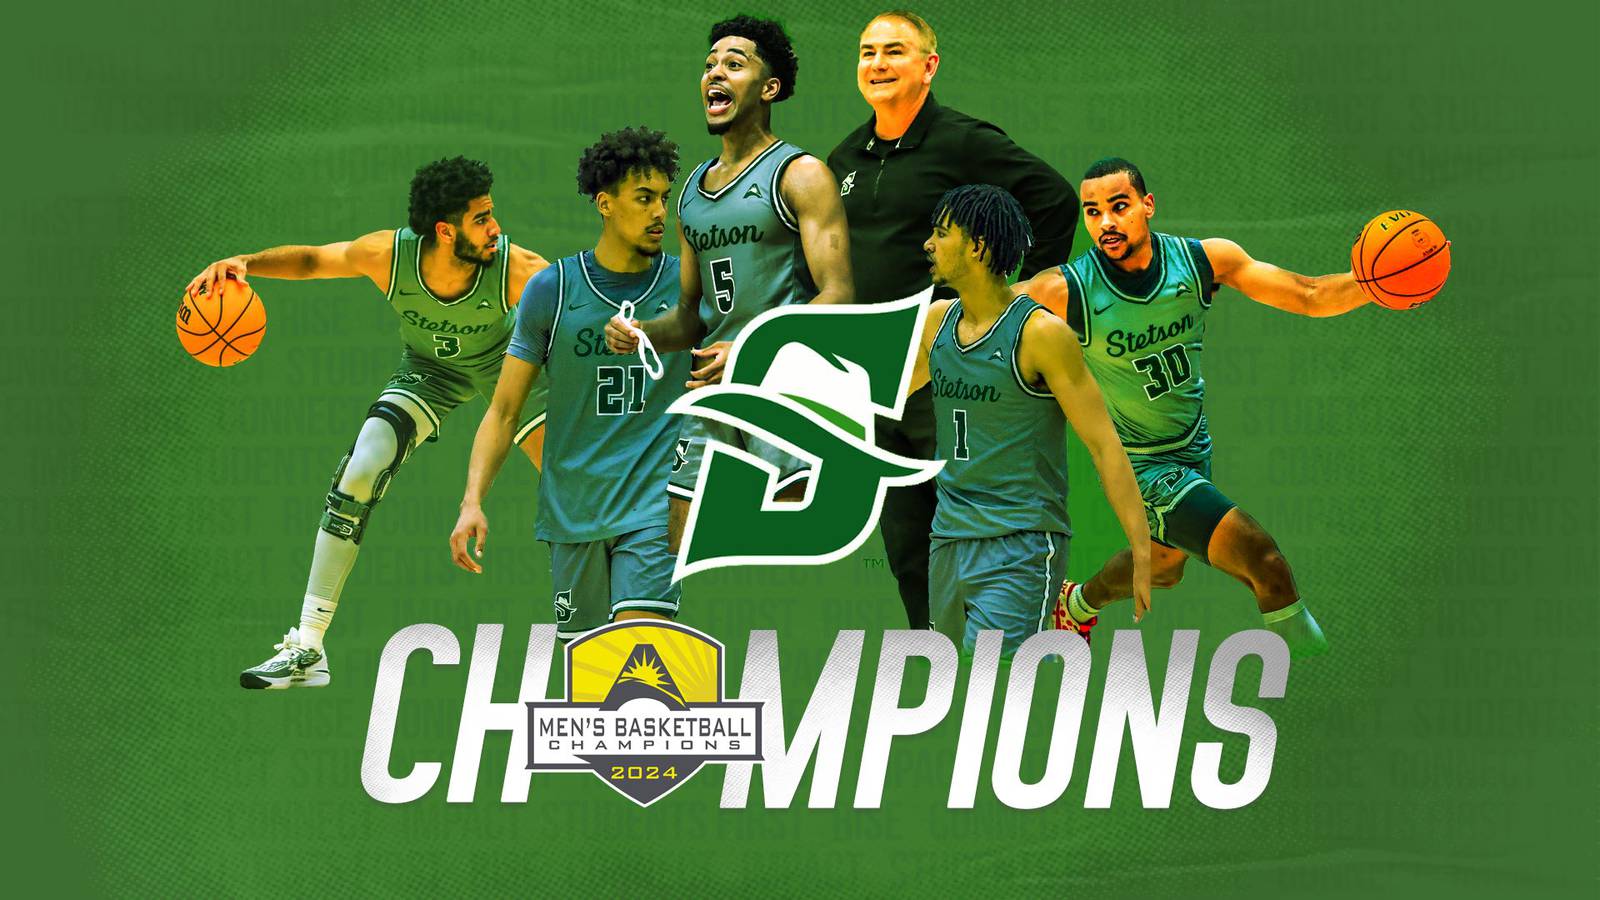 Stetson Men’s Basketball punches their first ticket in program history